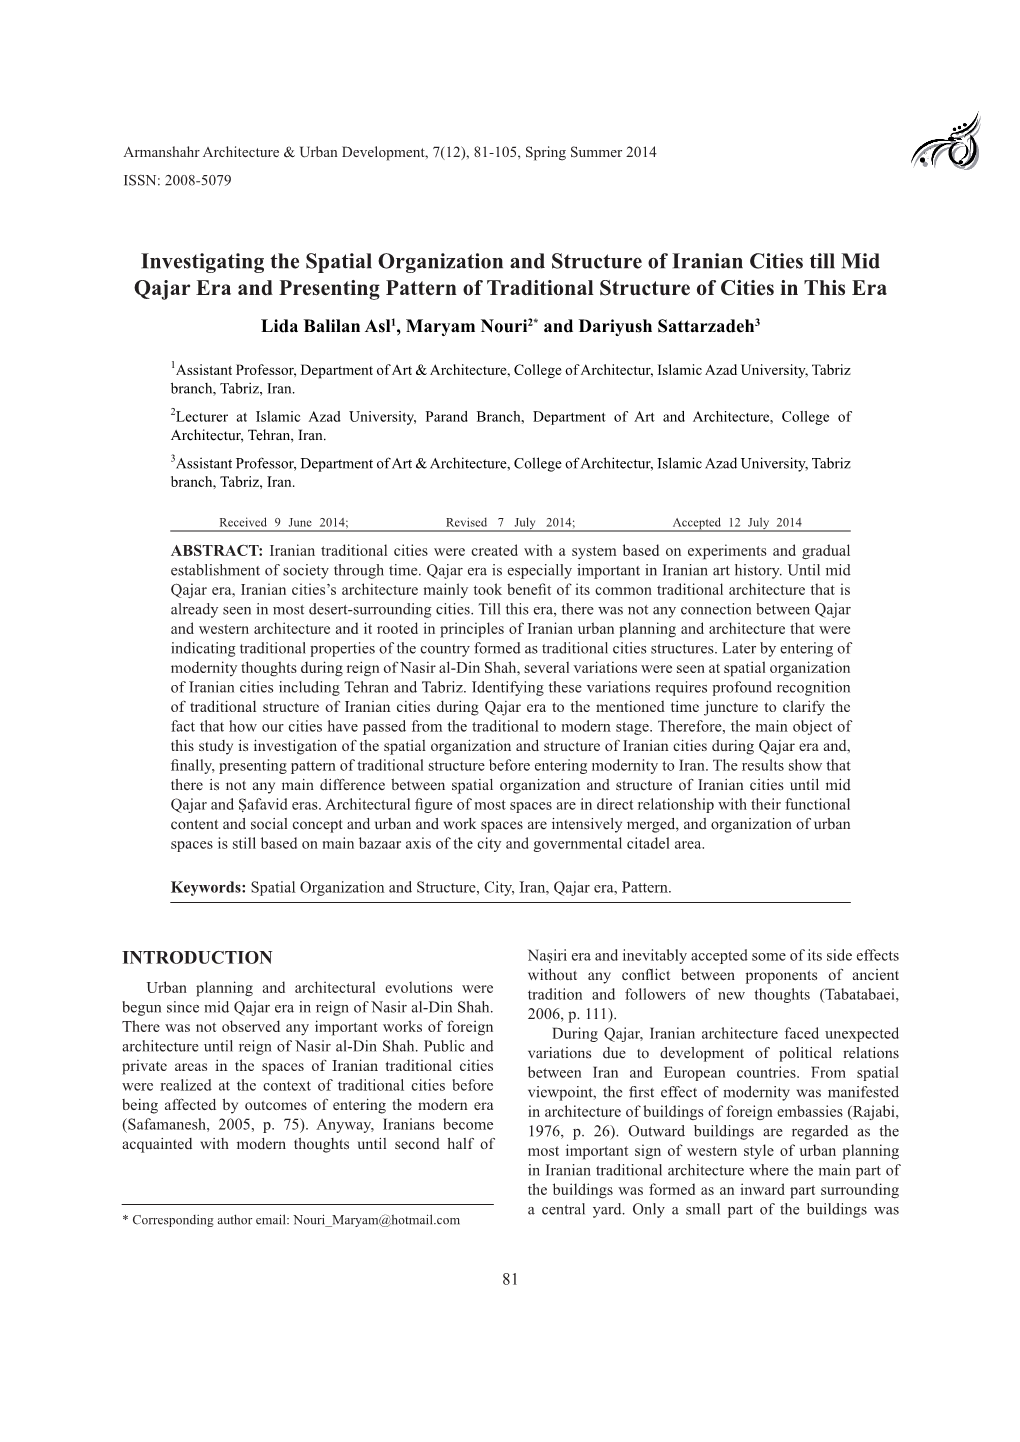 Investigating the Spatial Organization and Structure of Iranian Cities Till